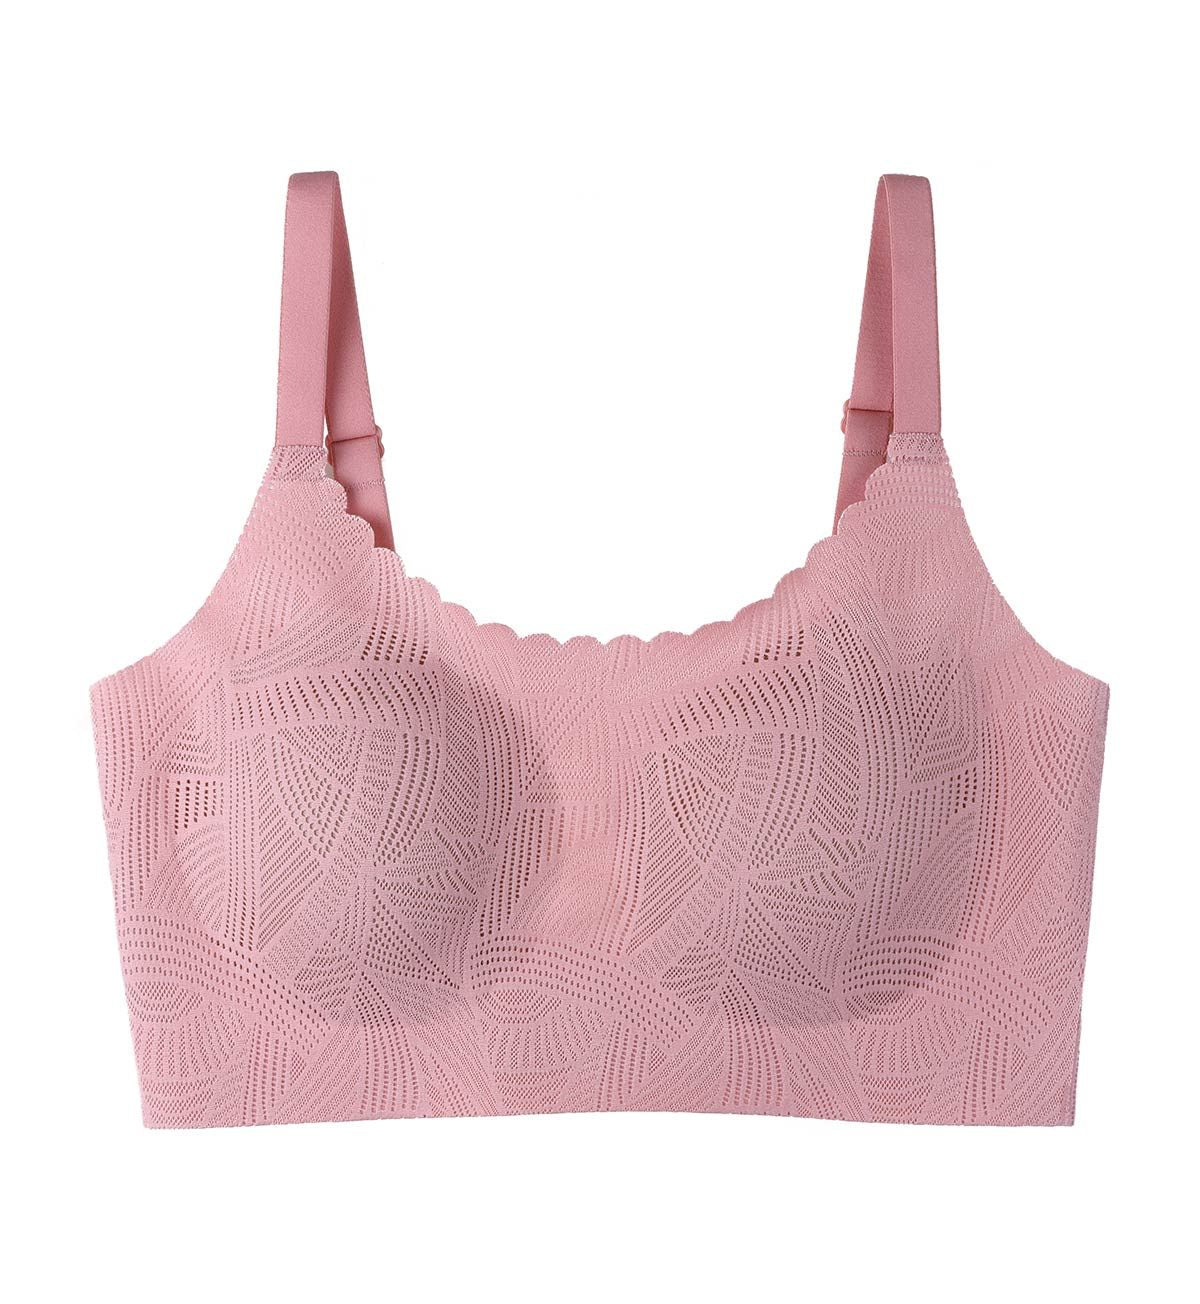 Guess Bras In Riyadh - Light Pink Natural Lace Padded Womens